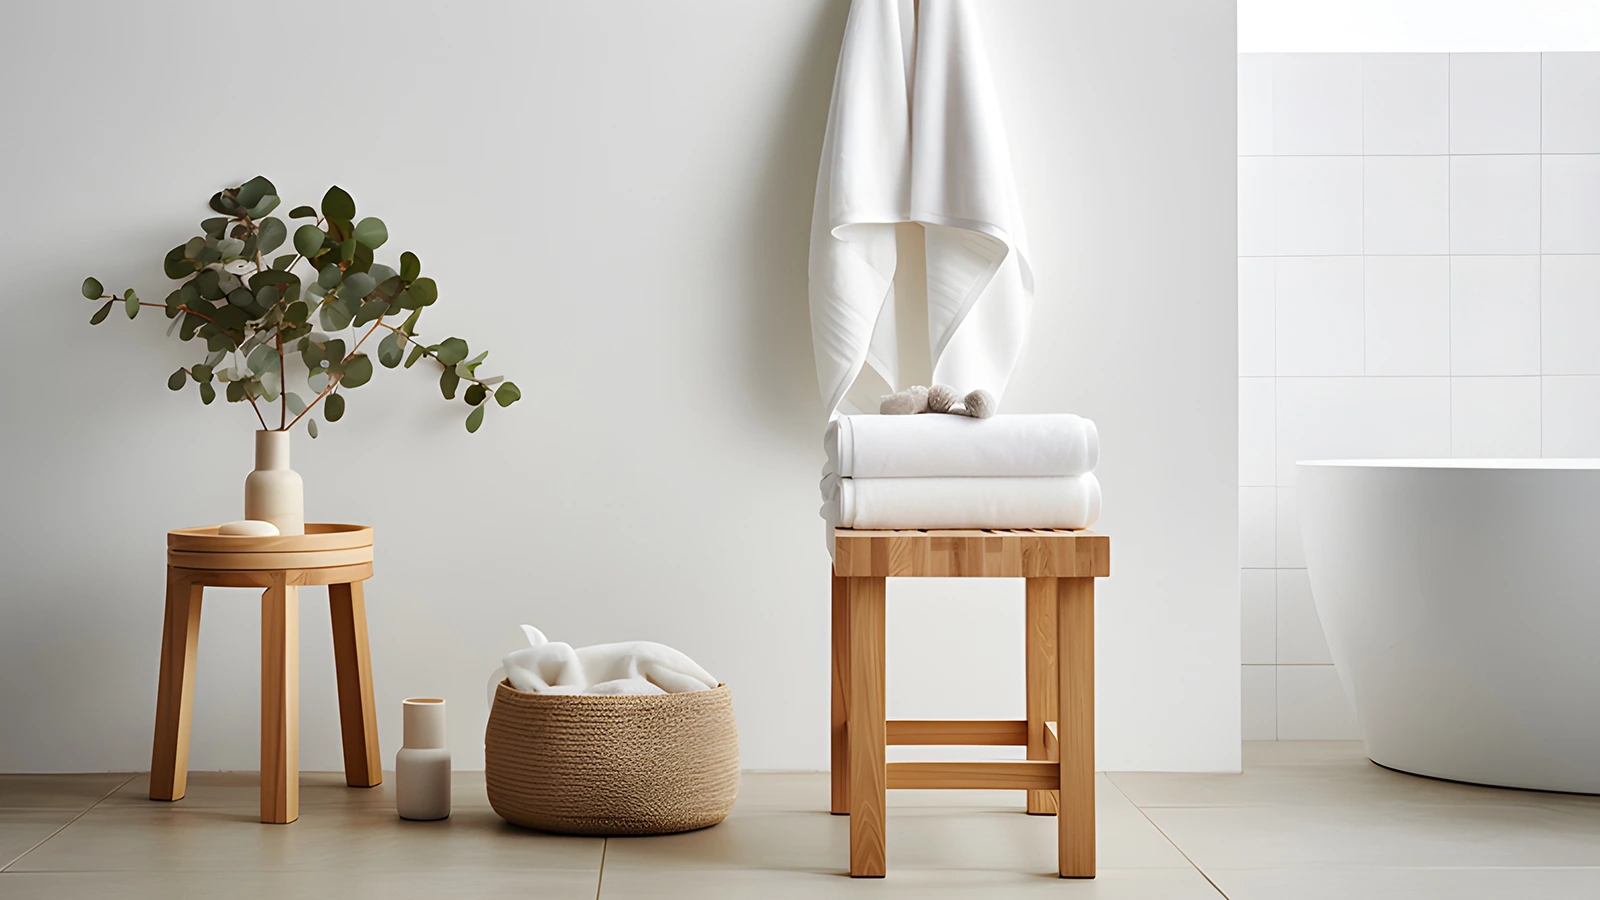 Learn how to decorate your apartment bathroom with a wooden stool and towels for a stylish touch.